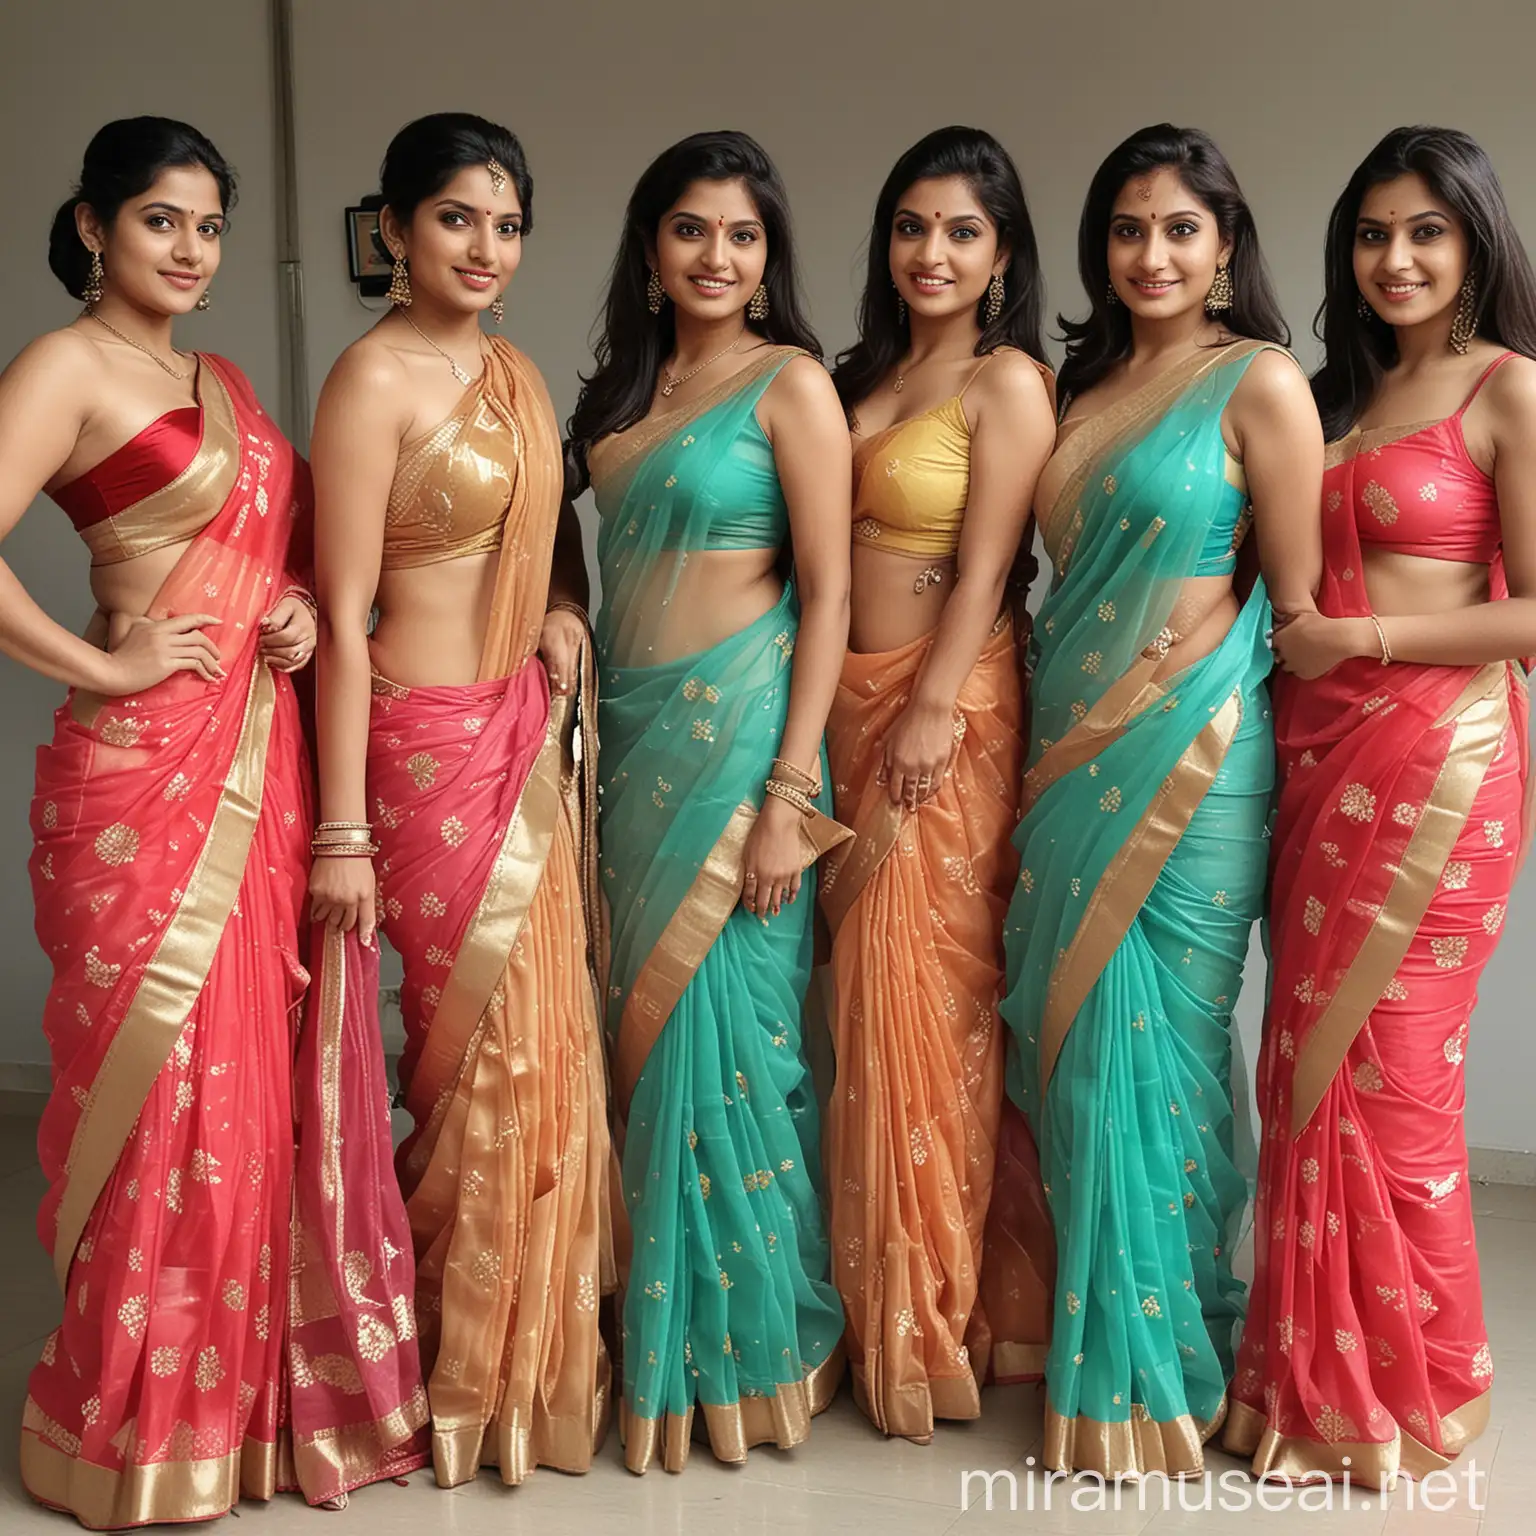 Stunning Indian Women in Traditional Sarees Embracing Elegance